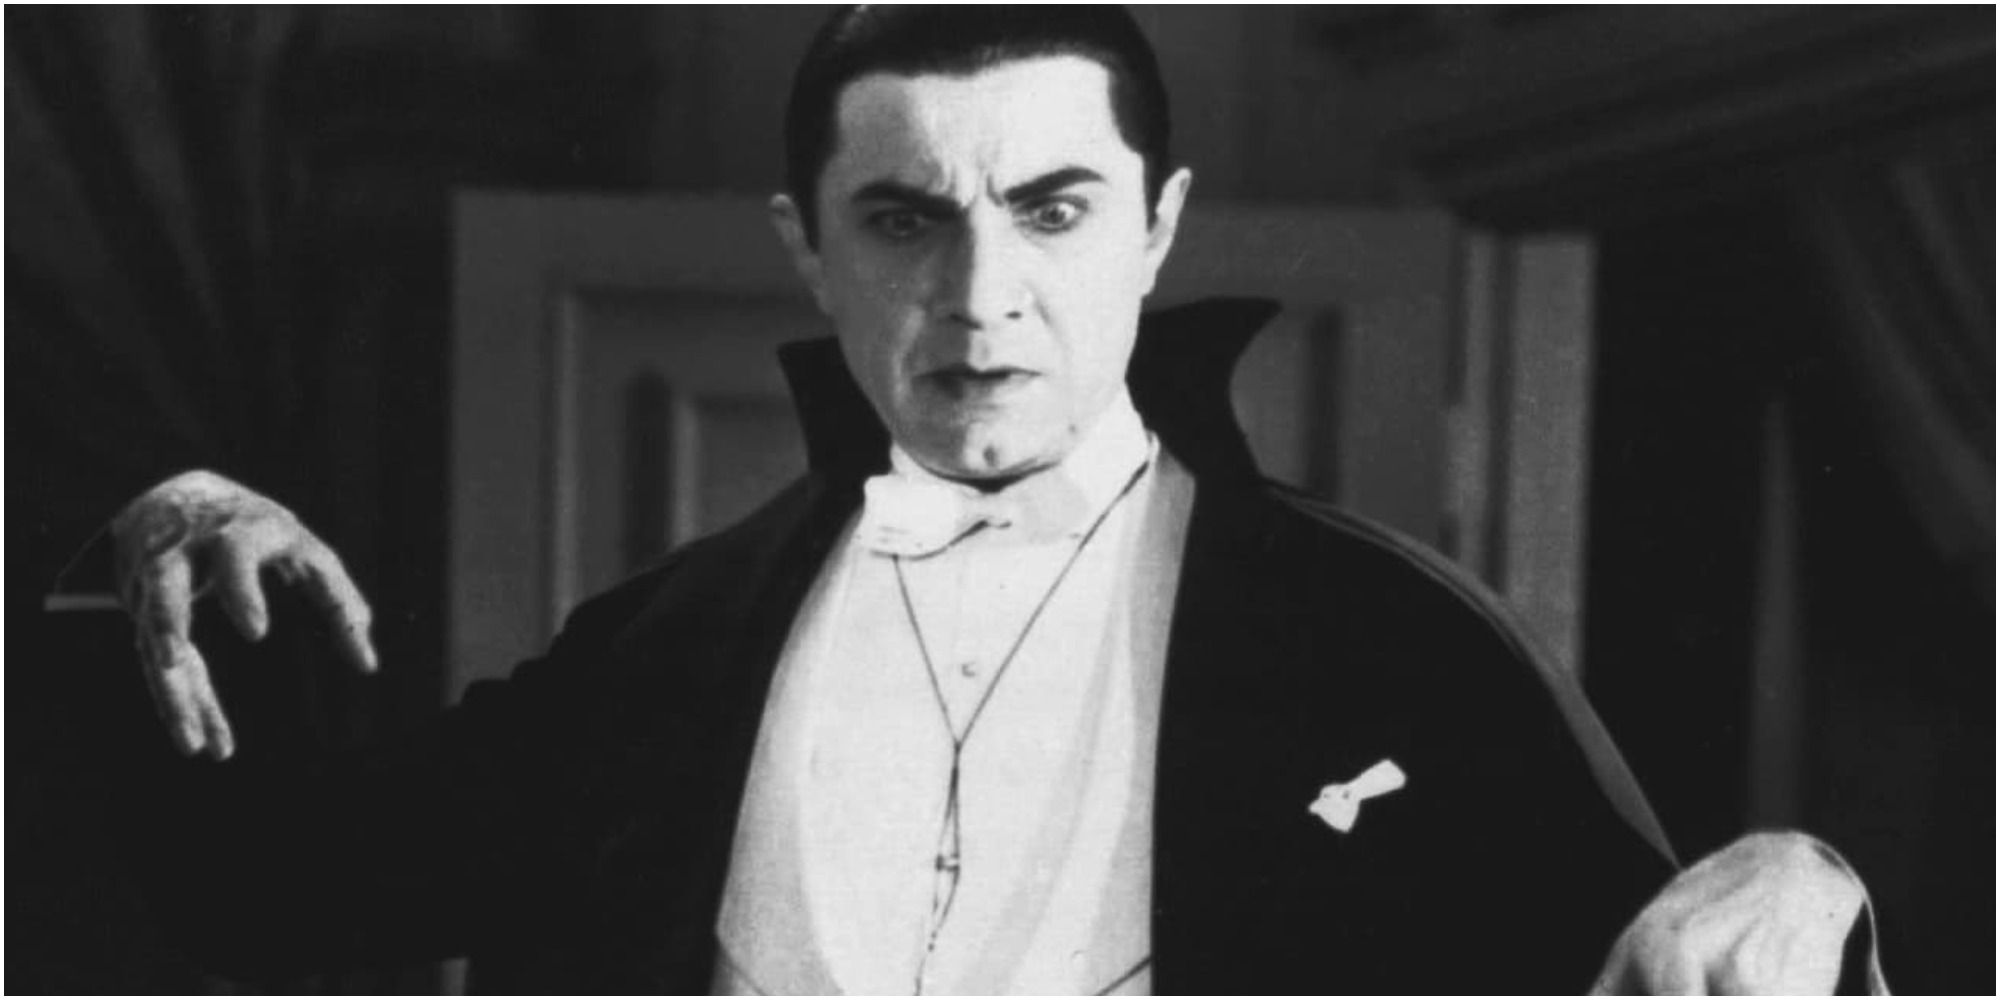 Every Universal Monsters Dracula Movie Ranked From Worst To Best